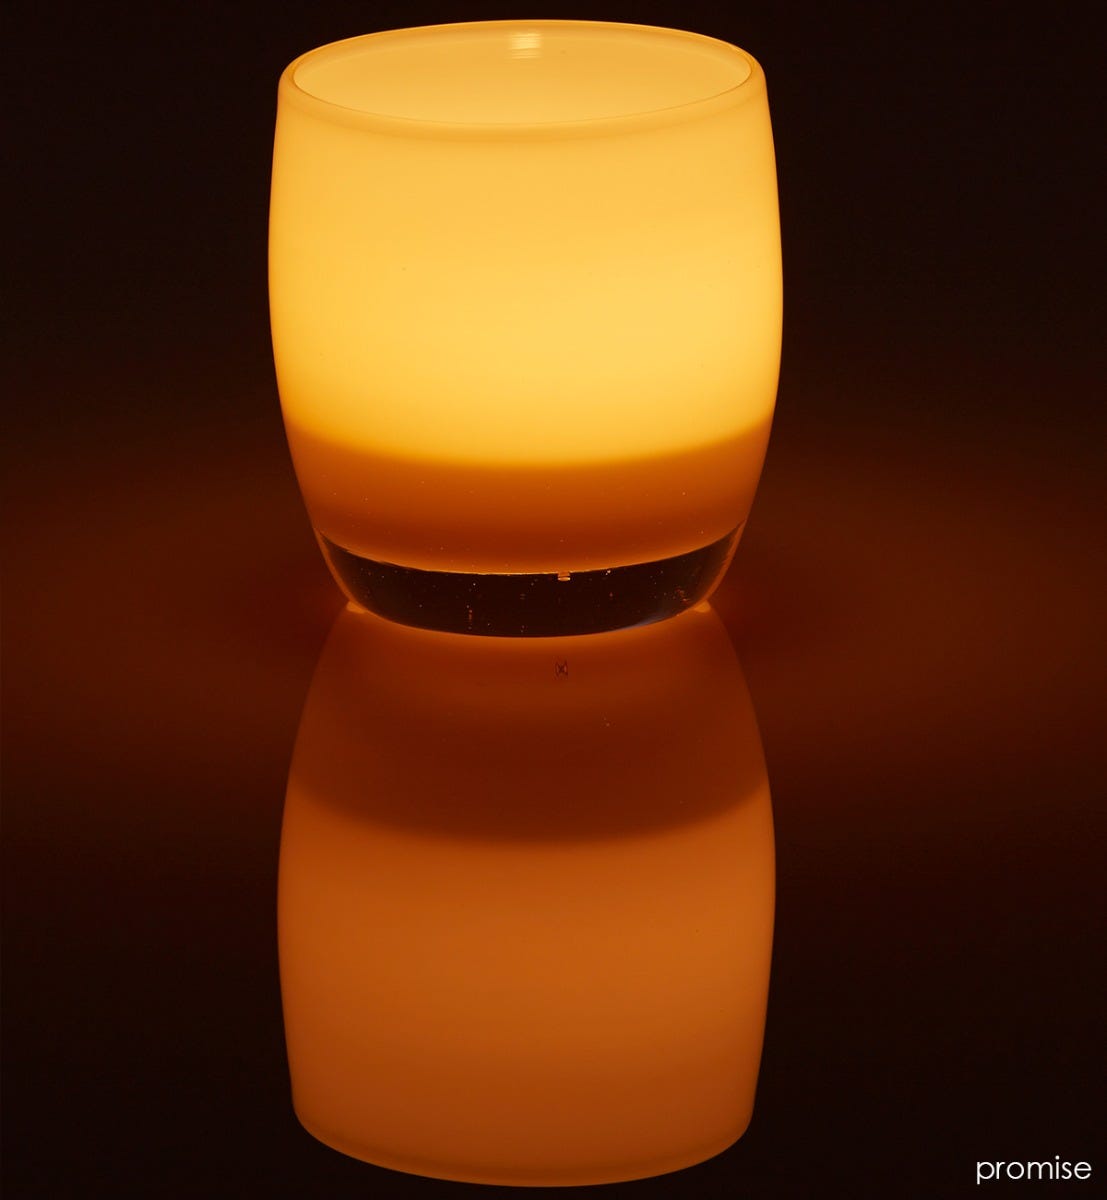 promise cream hand-blown glass votive candle holder